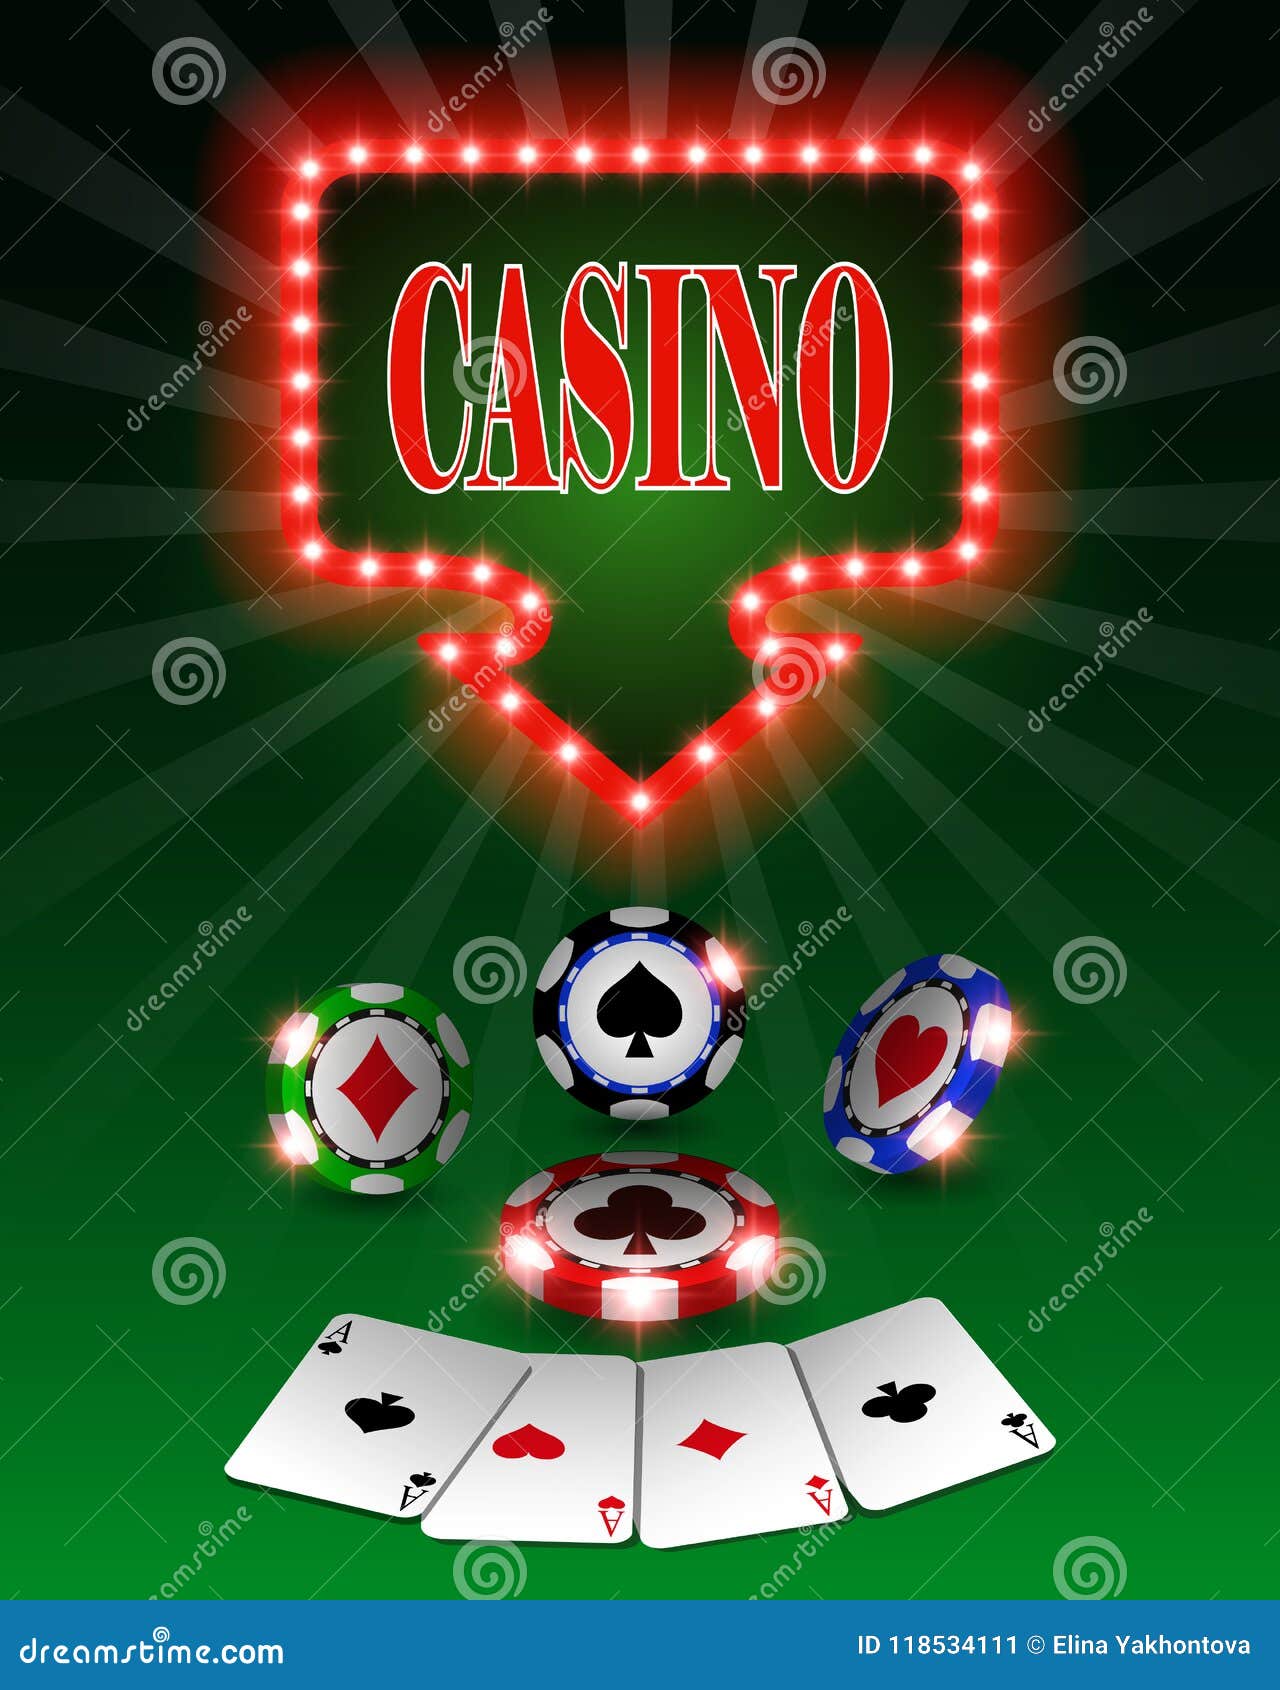 Download Vector Casino Poker Chips, Template For Design Backgrounds ...